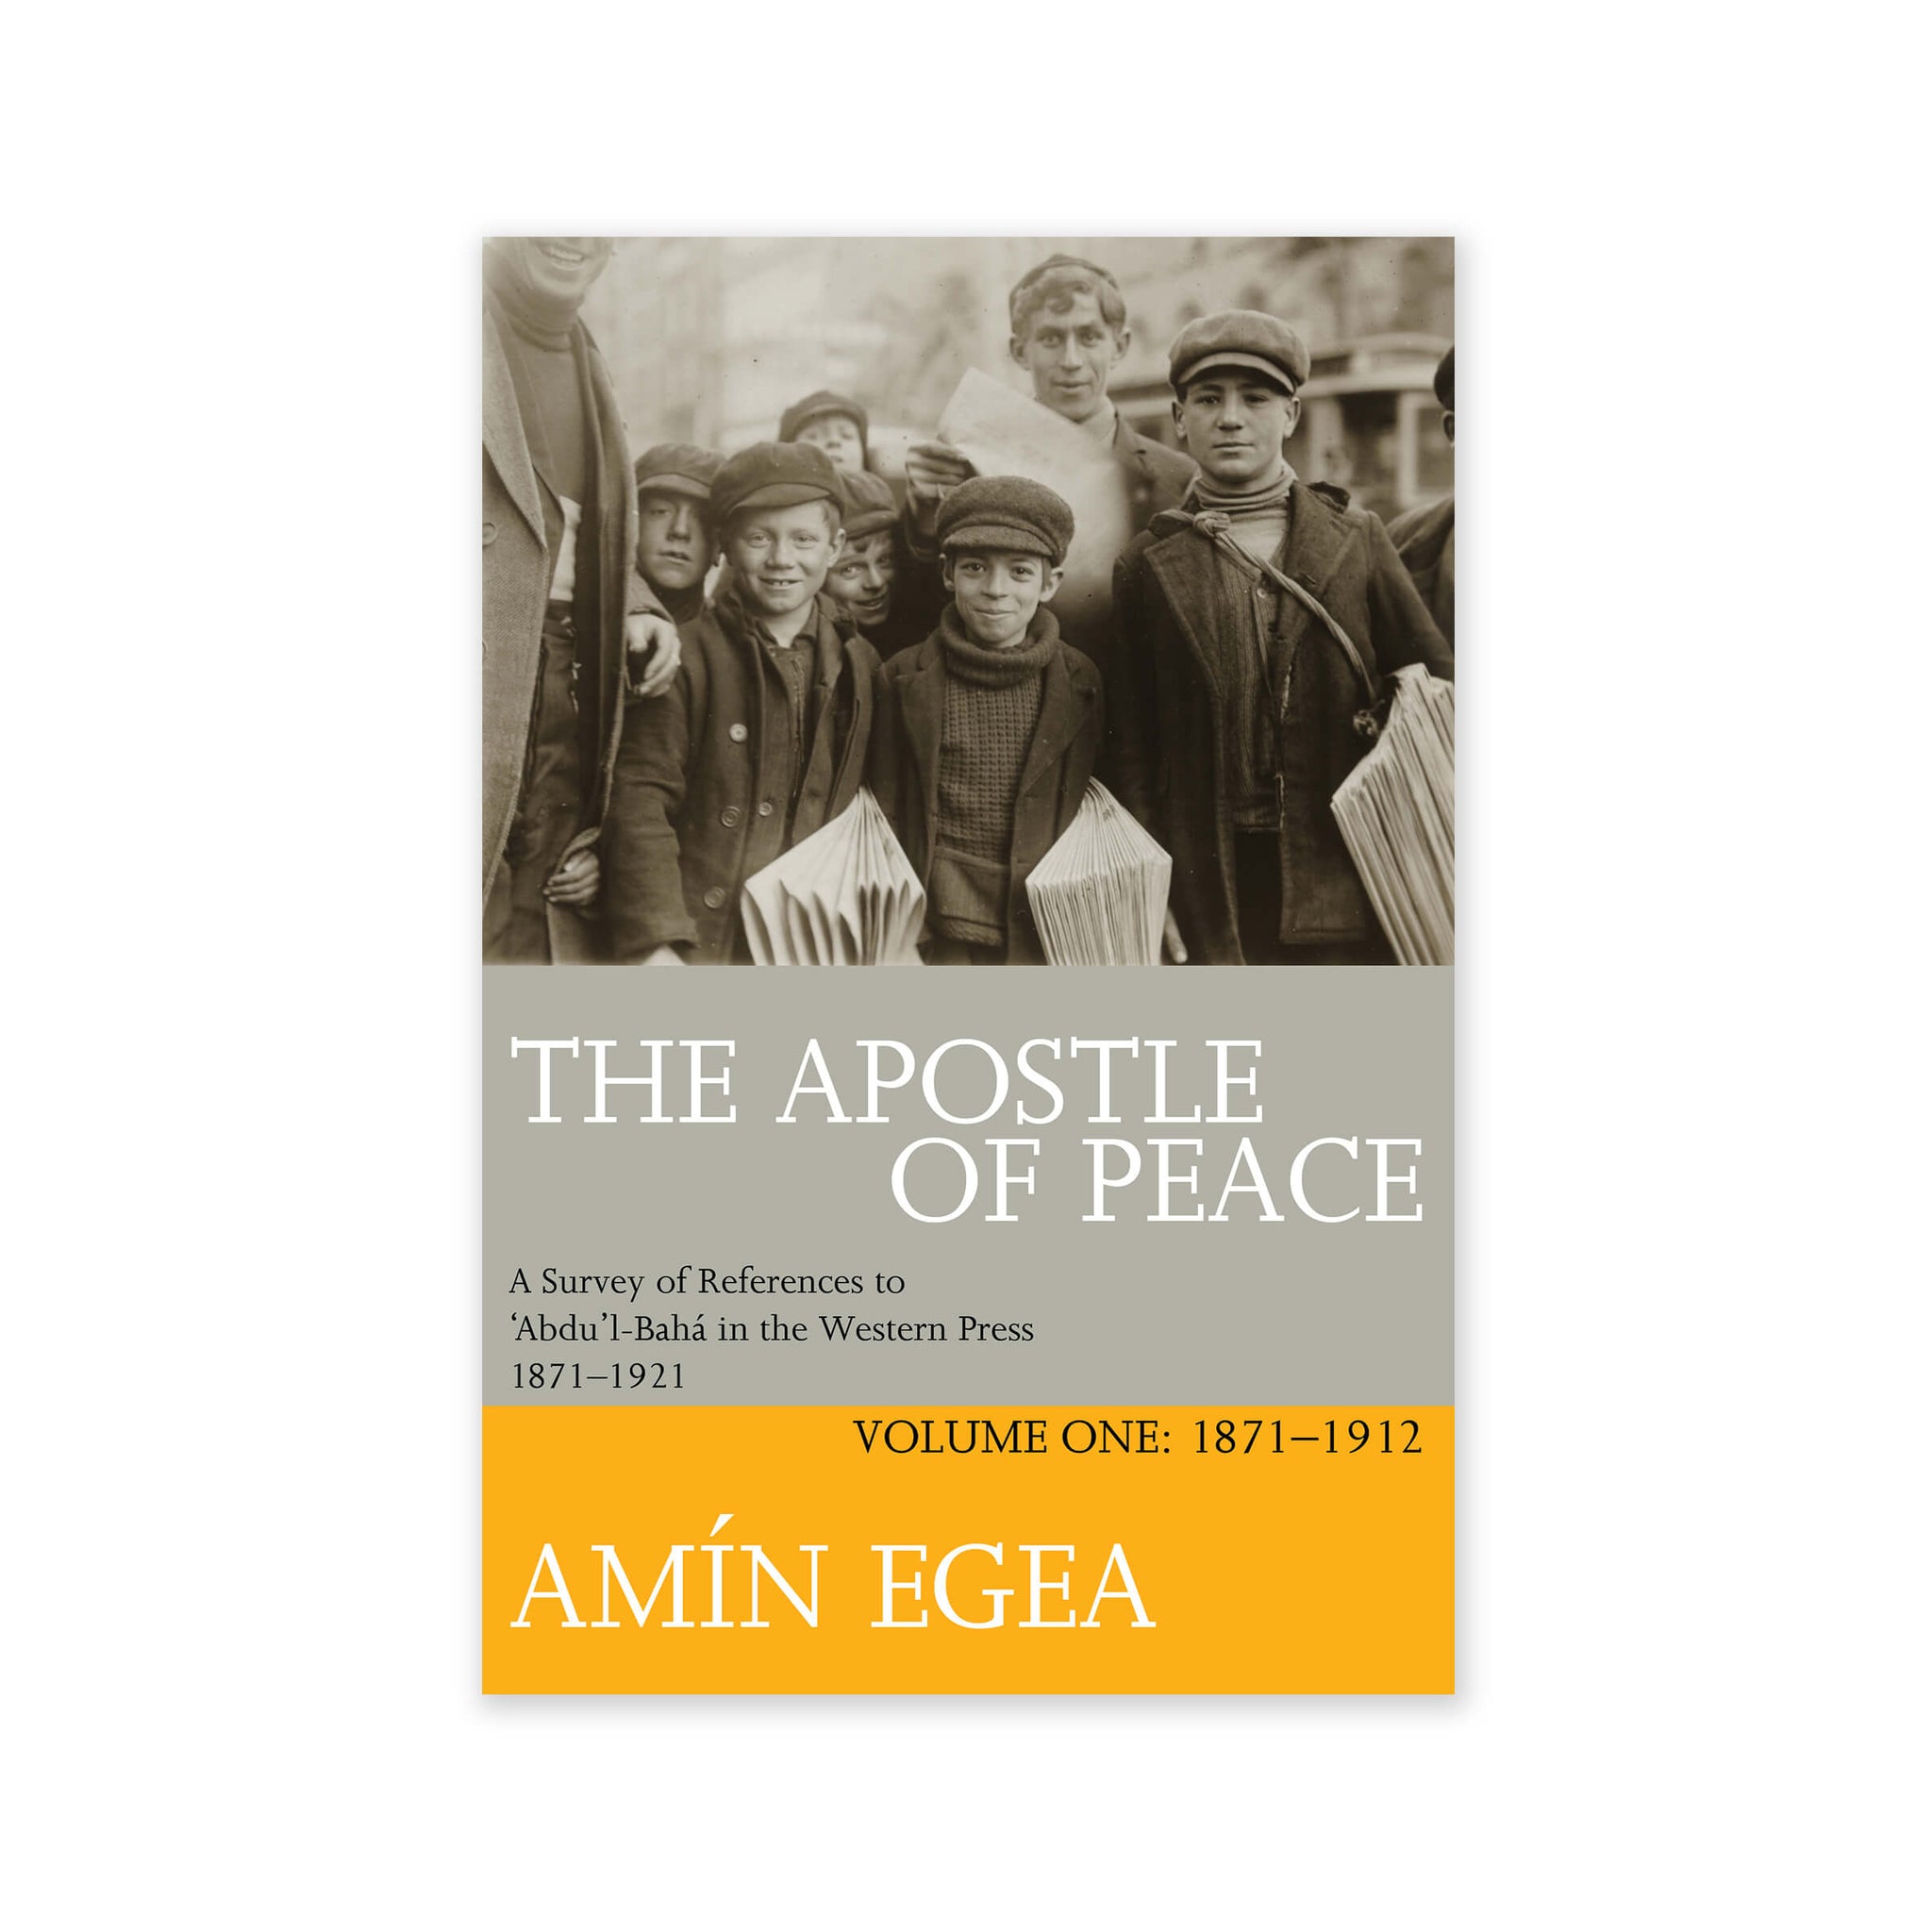 Apostle of Peace, Volume 1 - References to Abdu’l-Baha in the Western Press 1871-1911